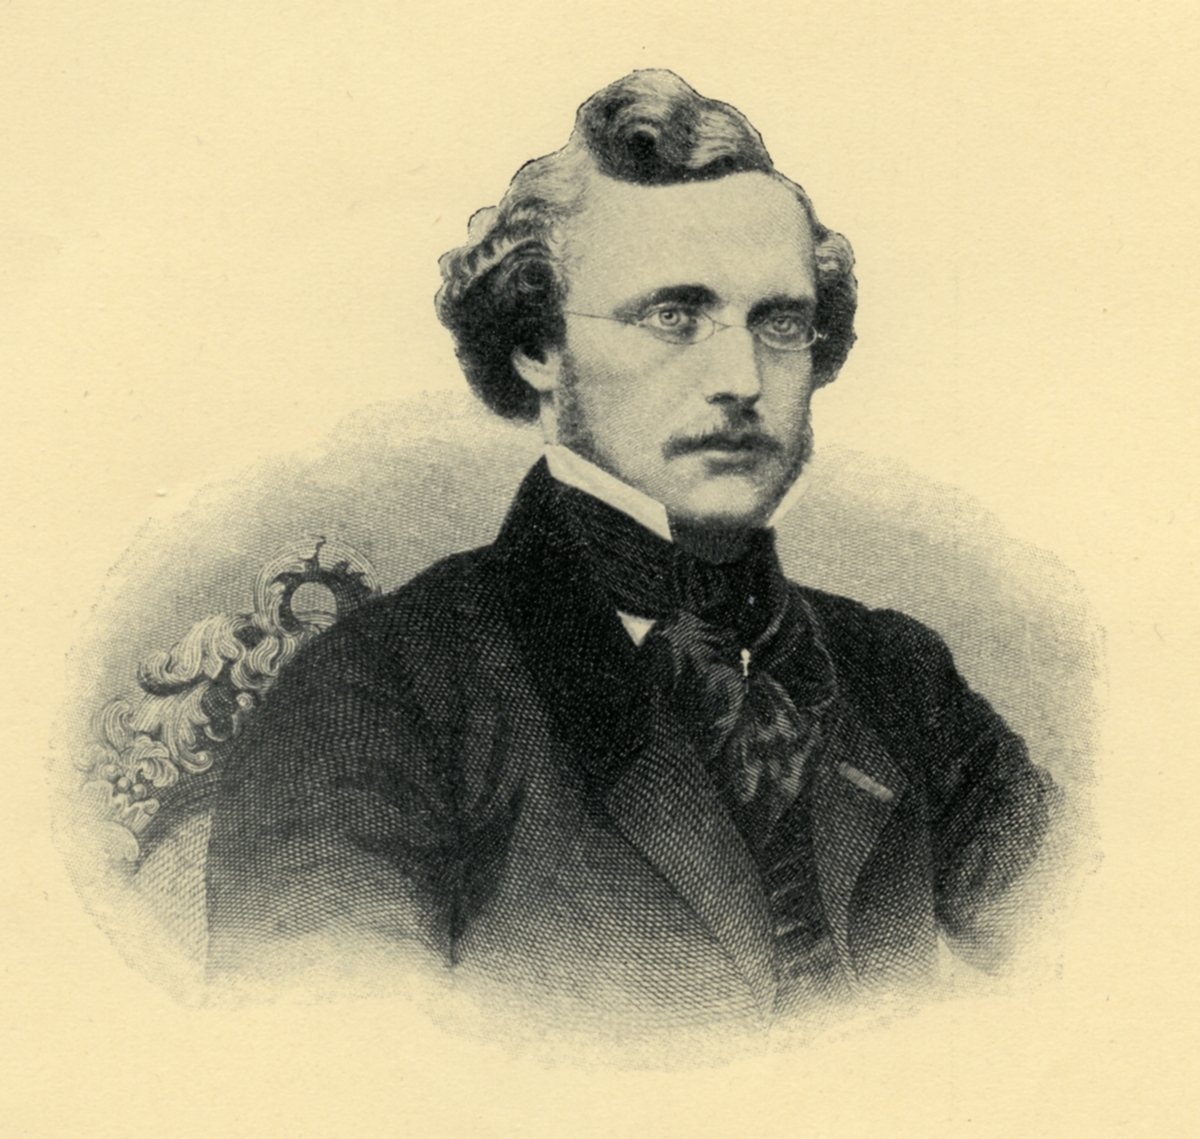 Ander, Alois (1821 - 1864)